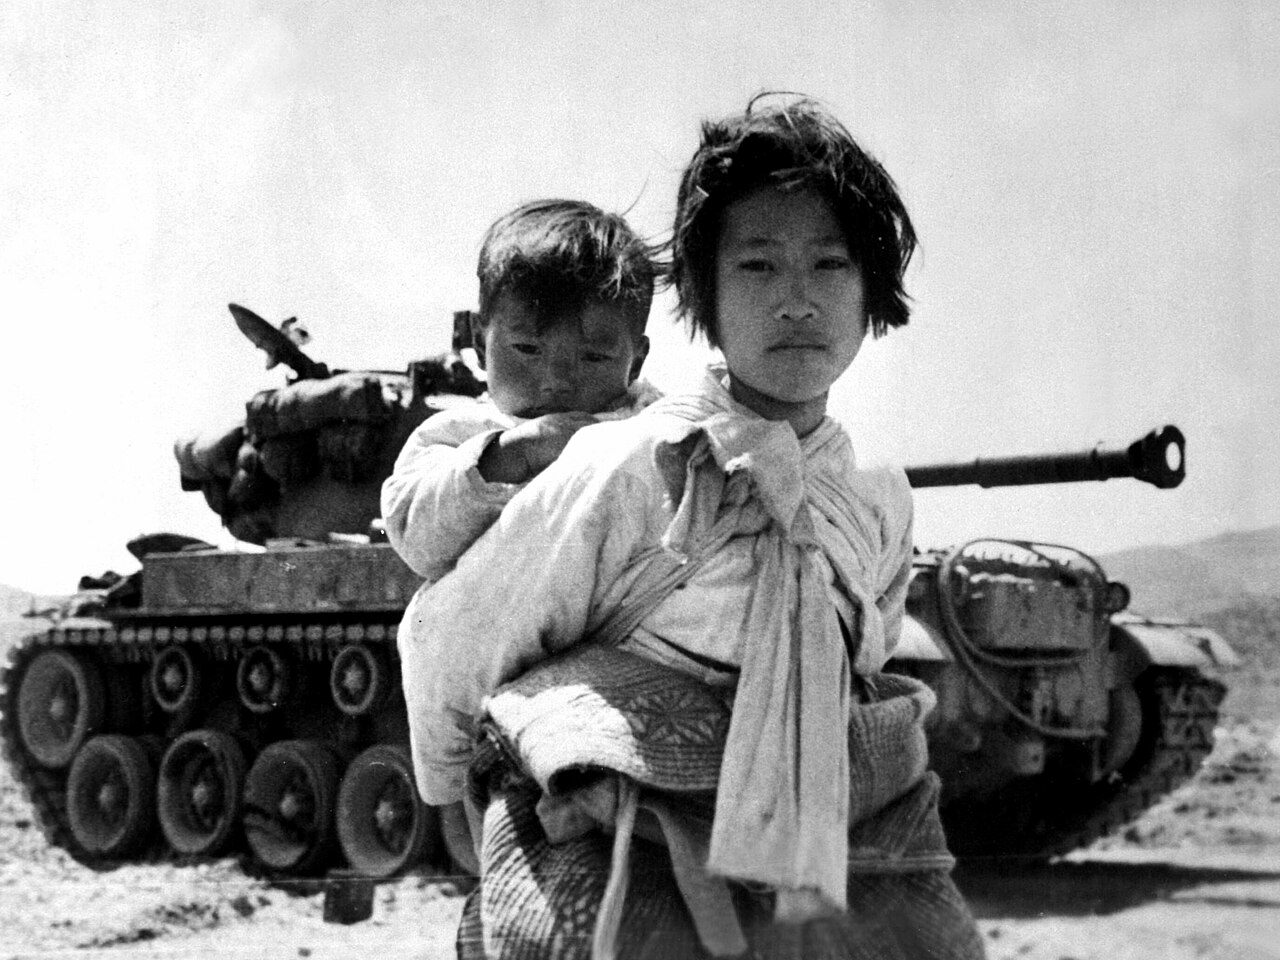 A Korean War refugee walks by a stalled M-46 tank with her brother on her back, 1951.